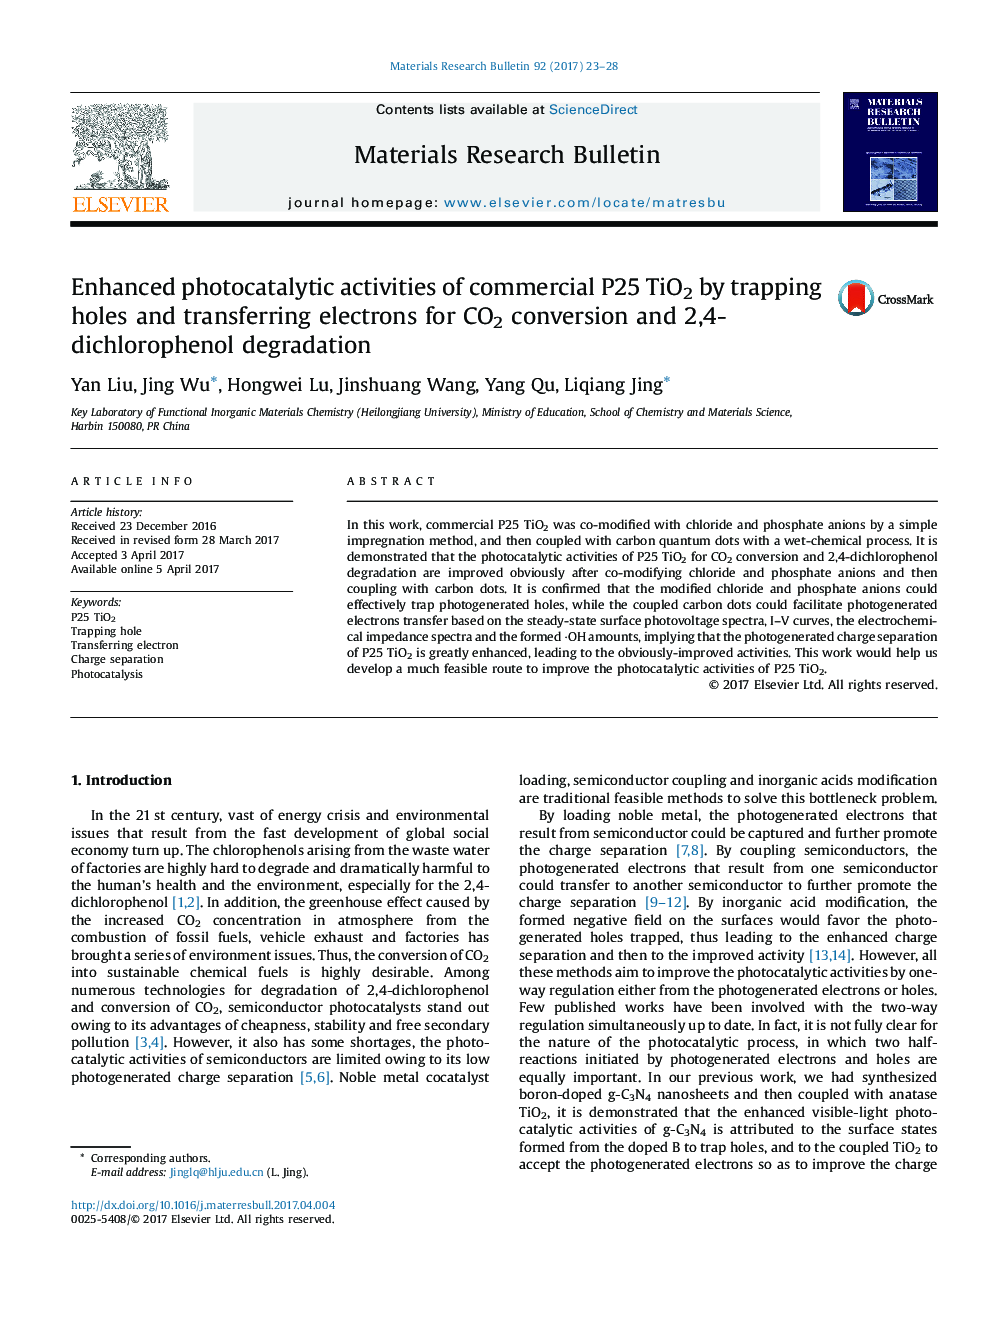 Enhanced photocatalytic activities of commercial P25 TiO2 by trapping holes and transferring electrons for CO2 conversion and 2,4-dichlorophenol degradation